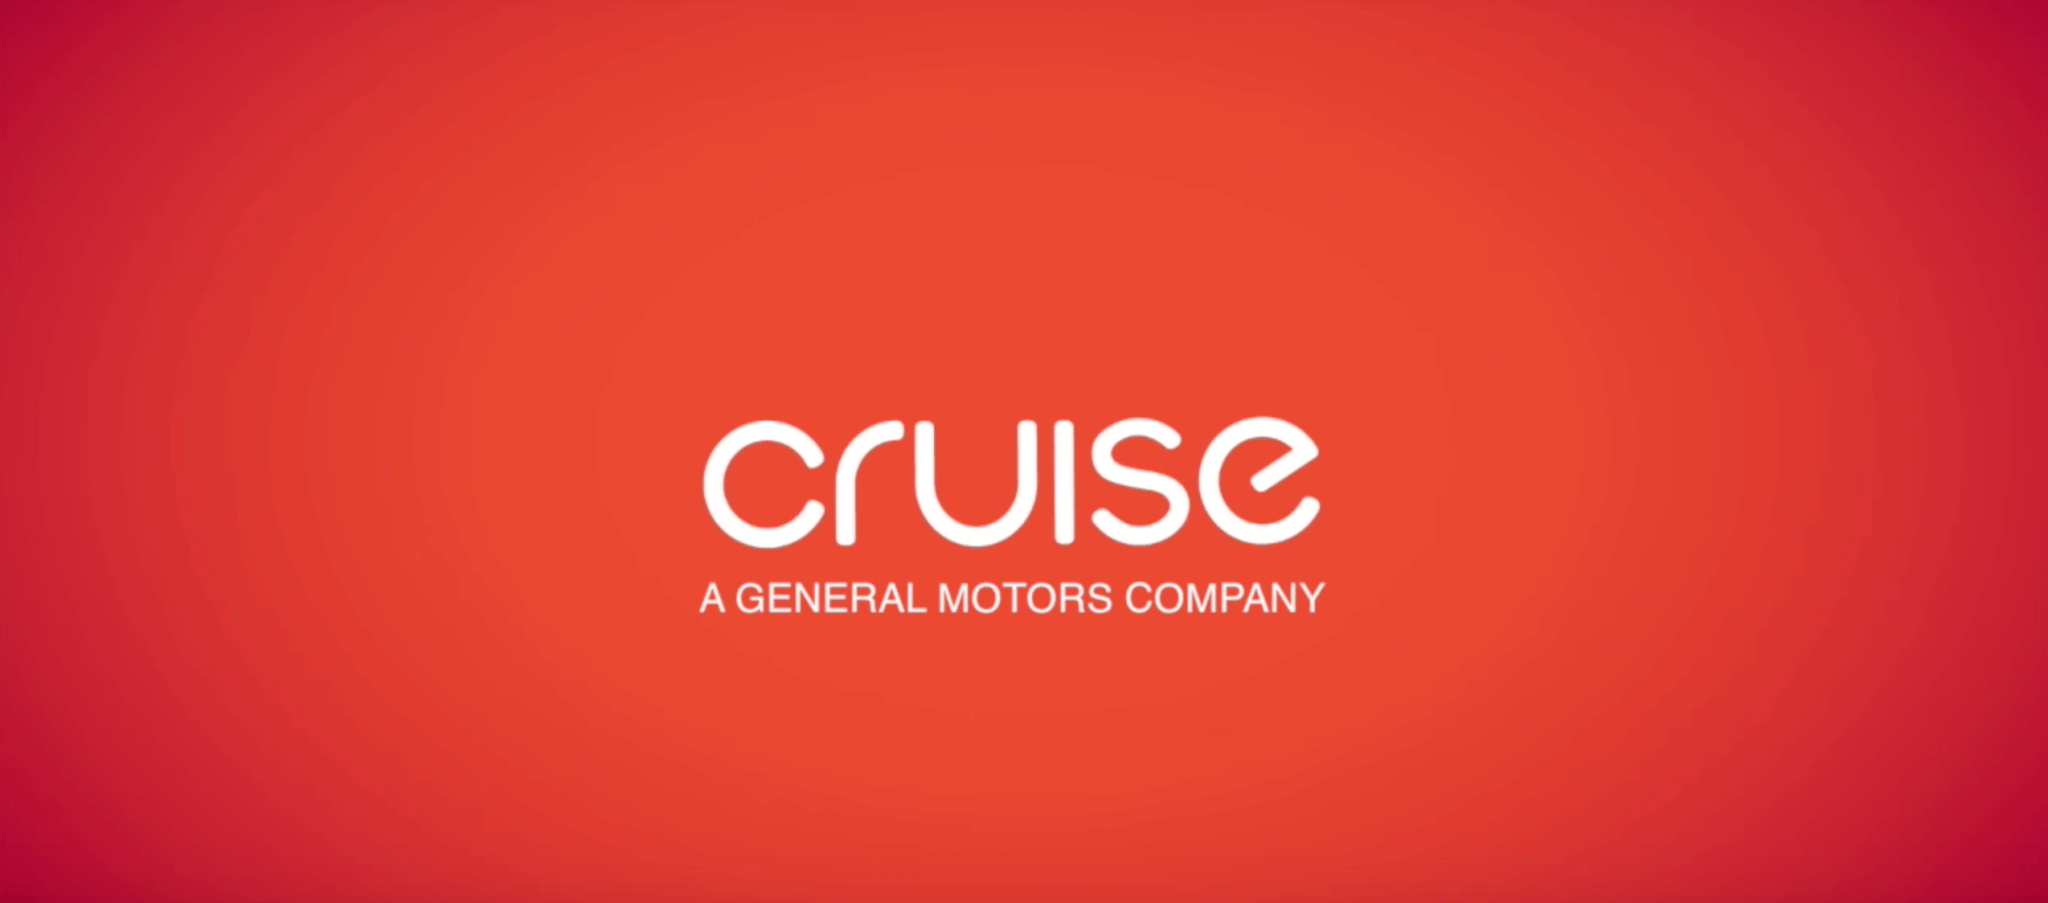 Cruise Automation Logo - Honda Steers $2 Billion Into GM's Cruise Self Driving Cars